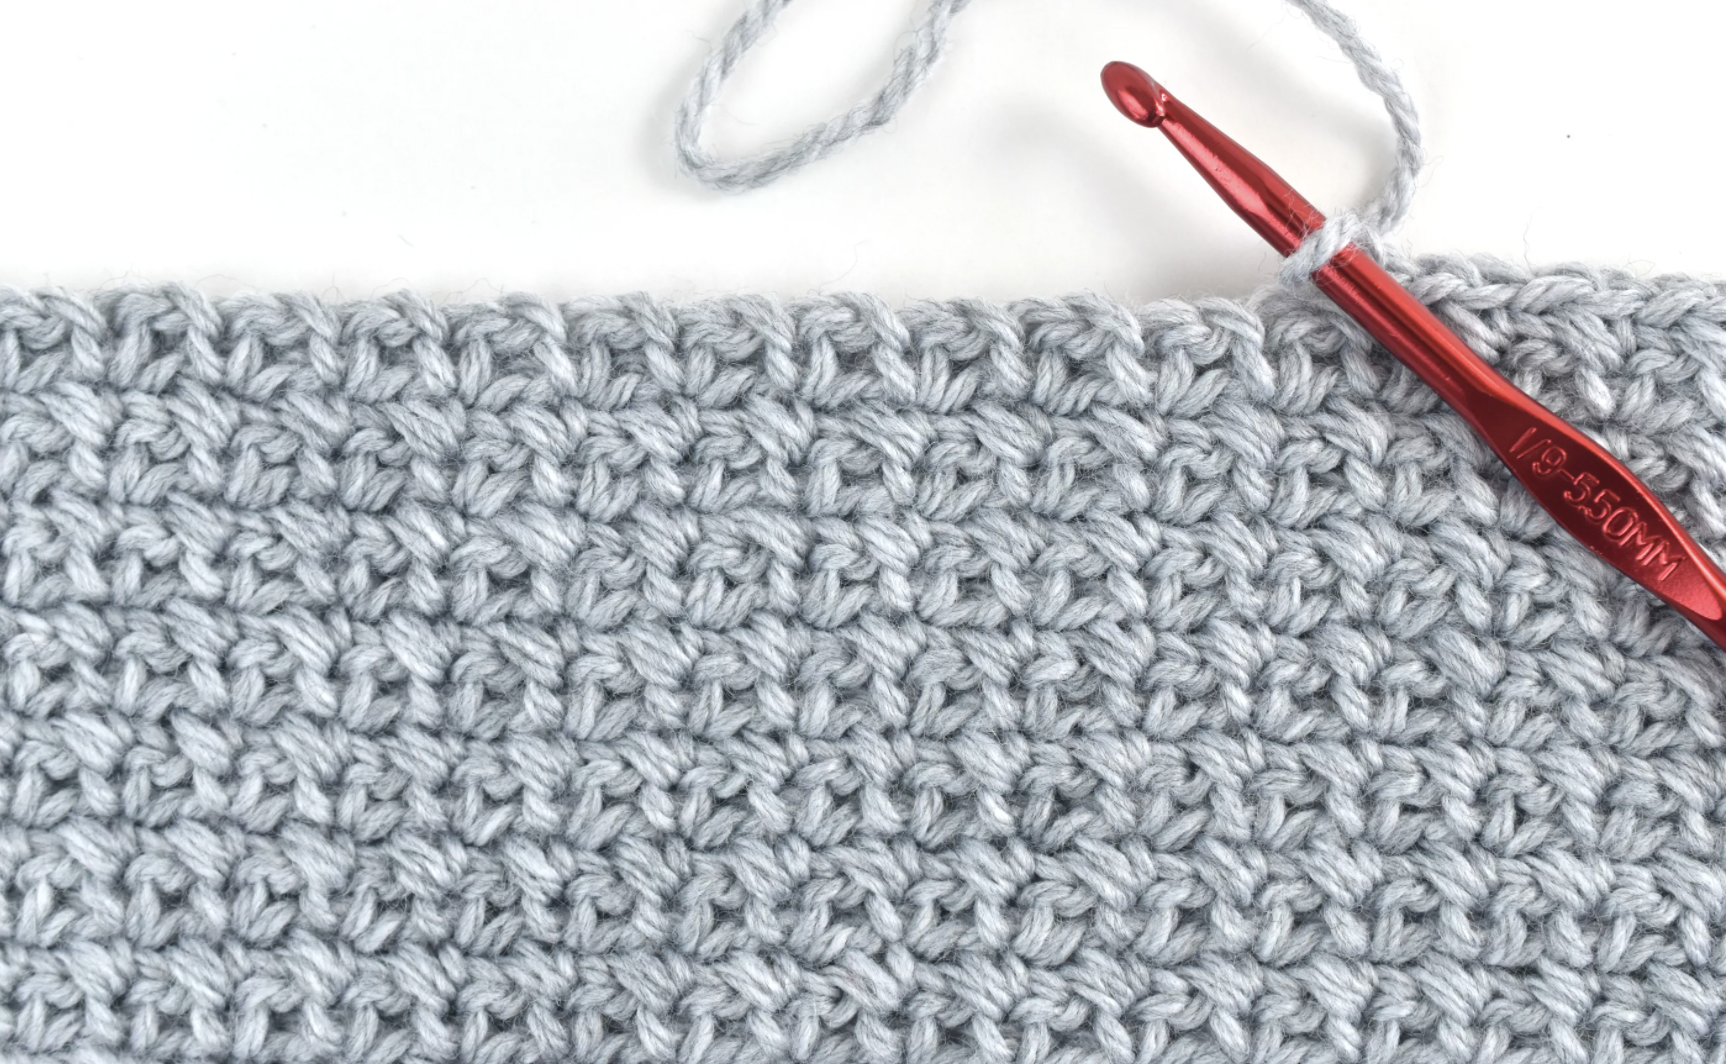 Crochet Stitches For Beginners See more